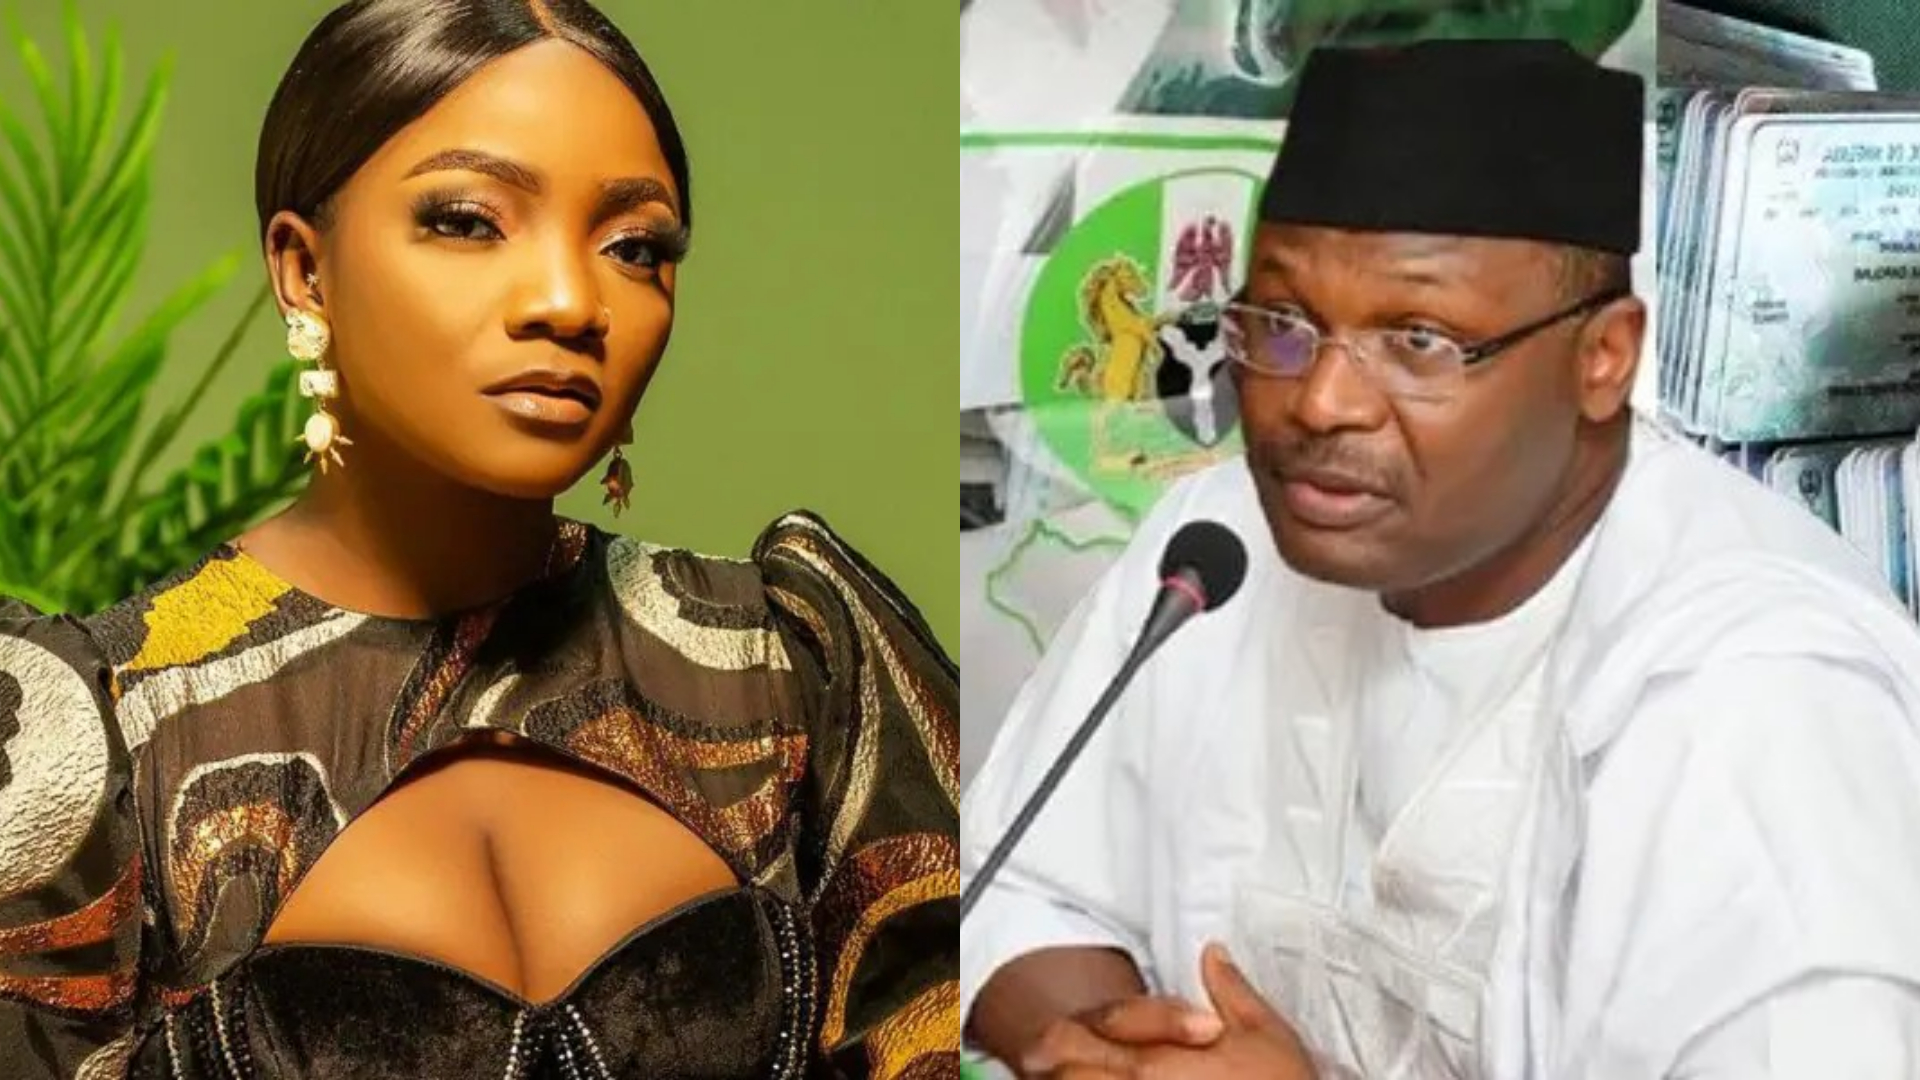 Simi Criticizes INEC for Election Irregularities, Calls for Improved Healthcare and Education